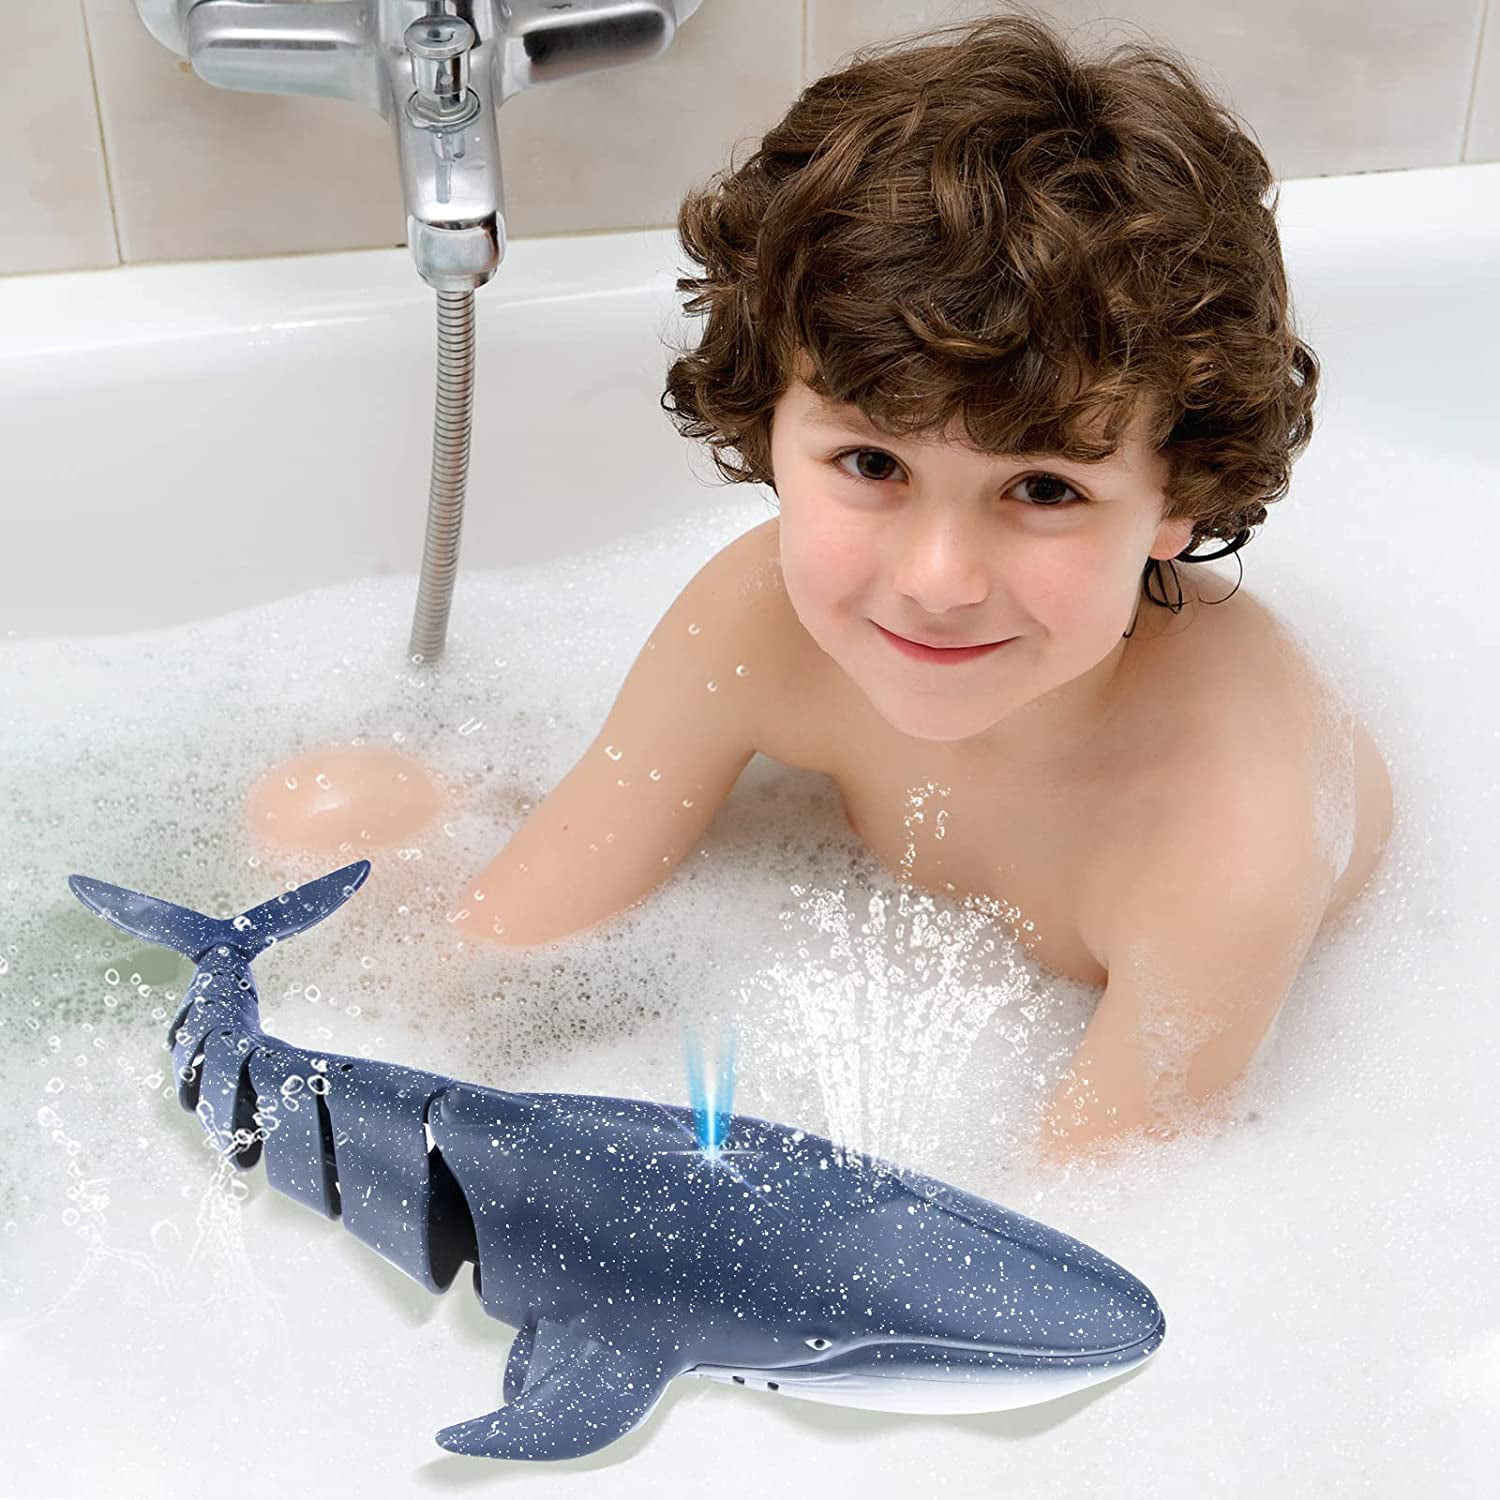  JELLY PLAY Remote Control Shark Pool Toys For Kids Age 8-12,24Ghz  Waterproof RC Boat,Toy Shark